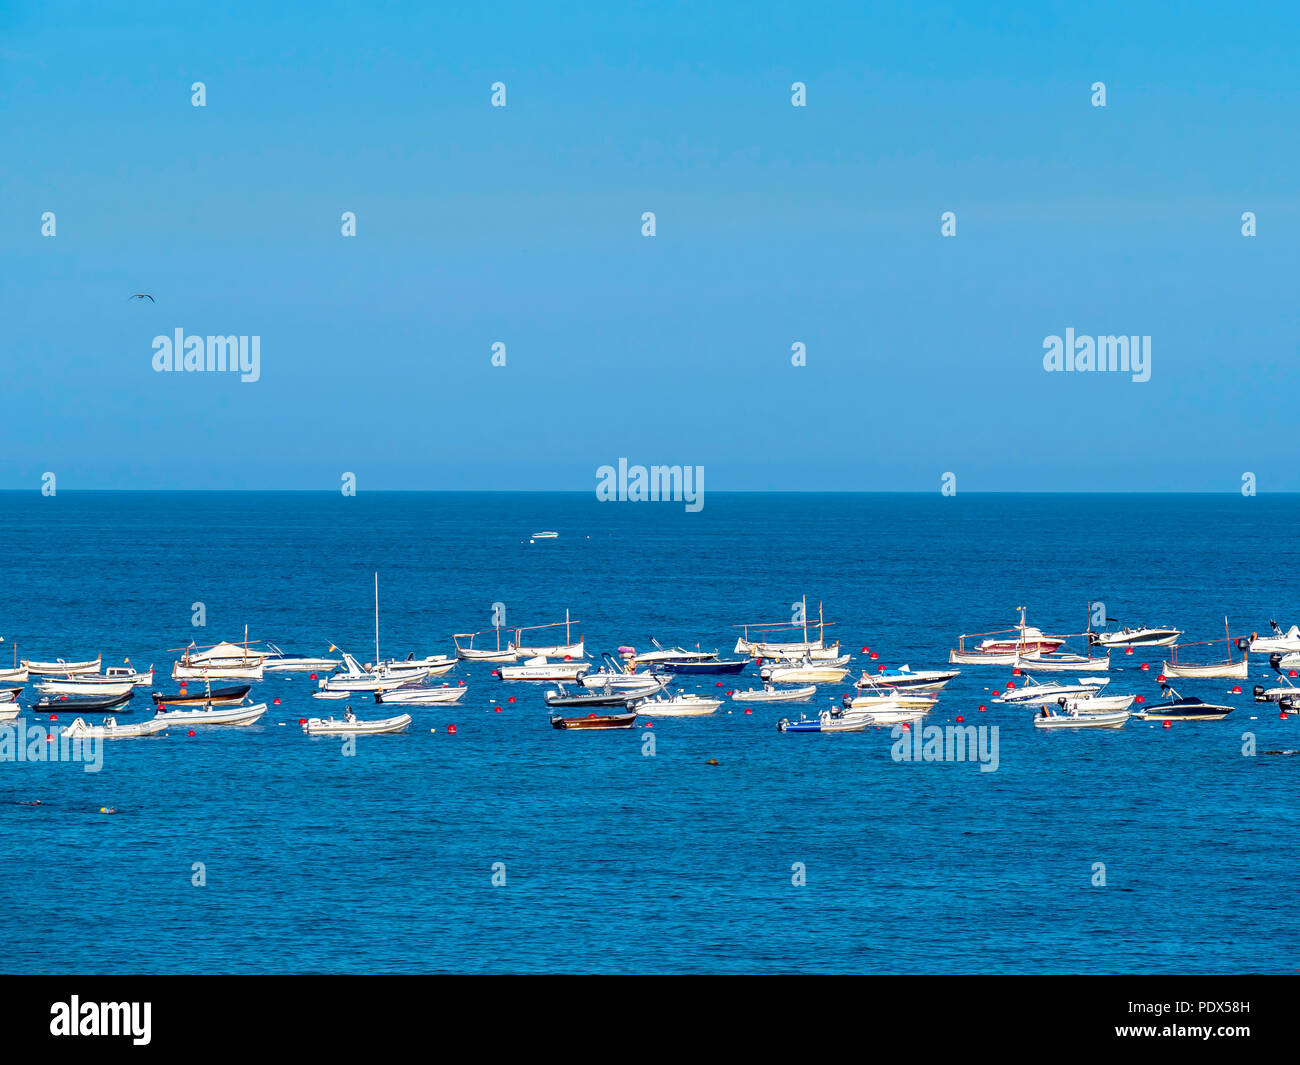 yachts and sailboats lining up in the ocean Stock Photo